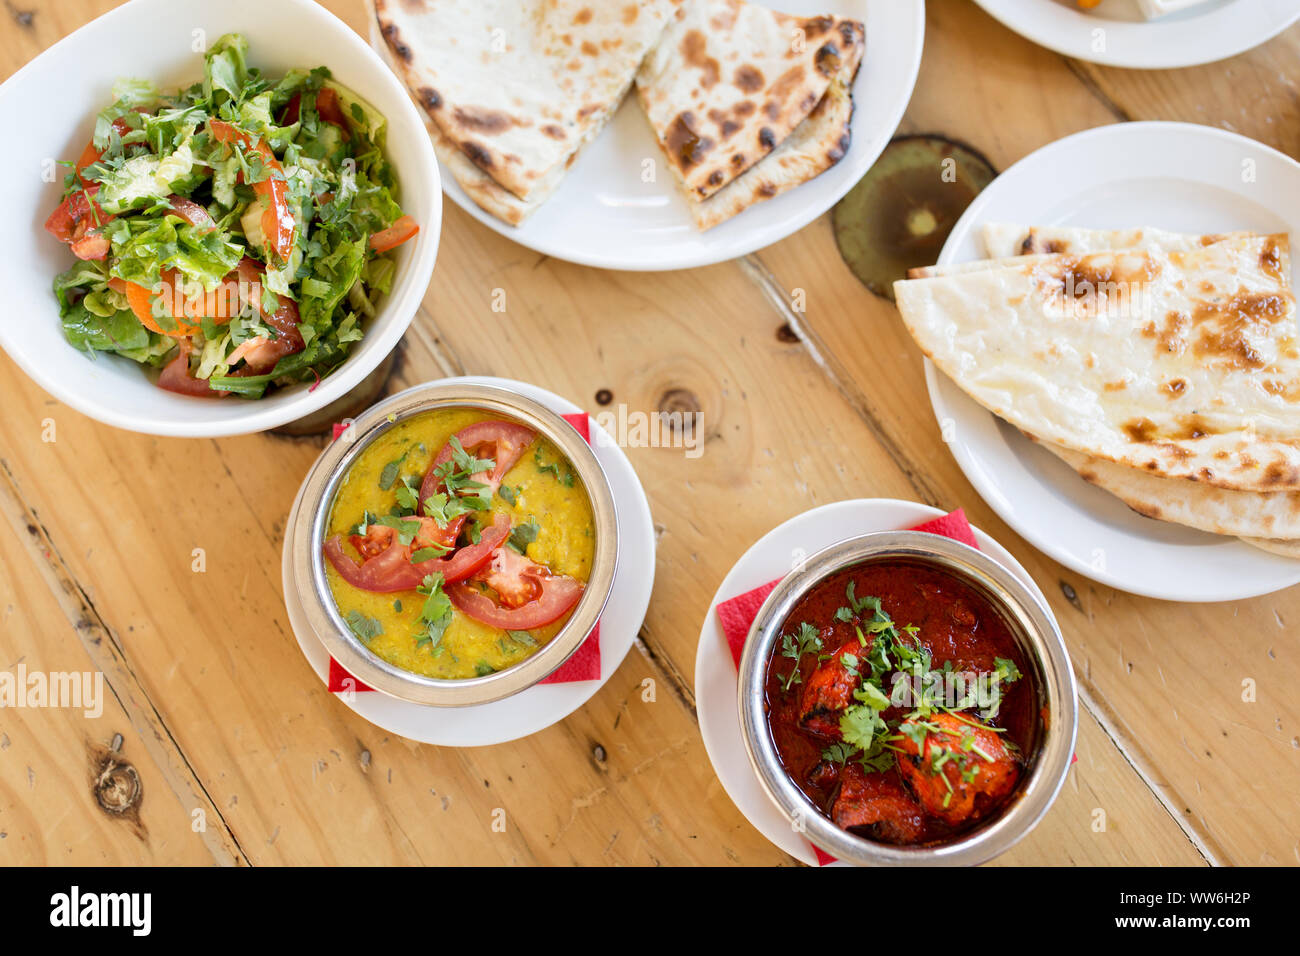 various food on table of indian restaurant Stock Photo